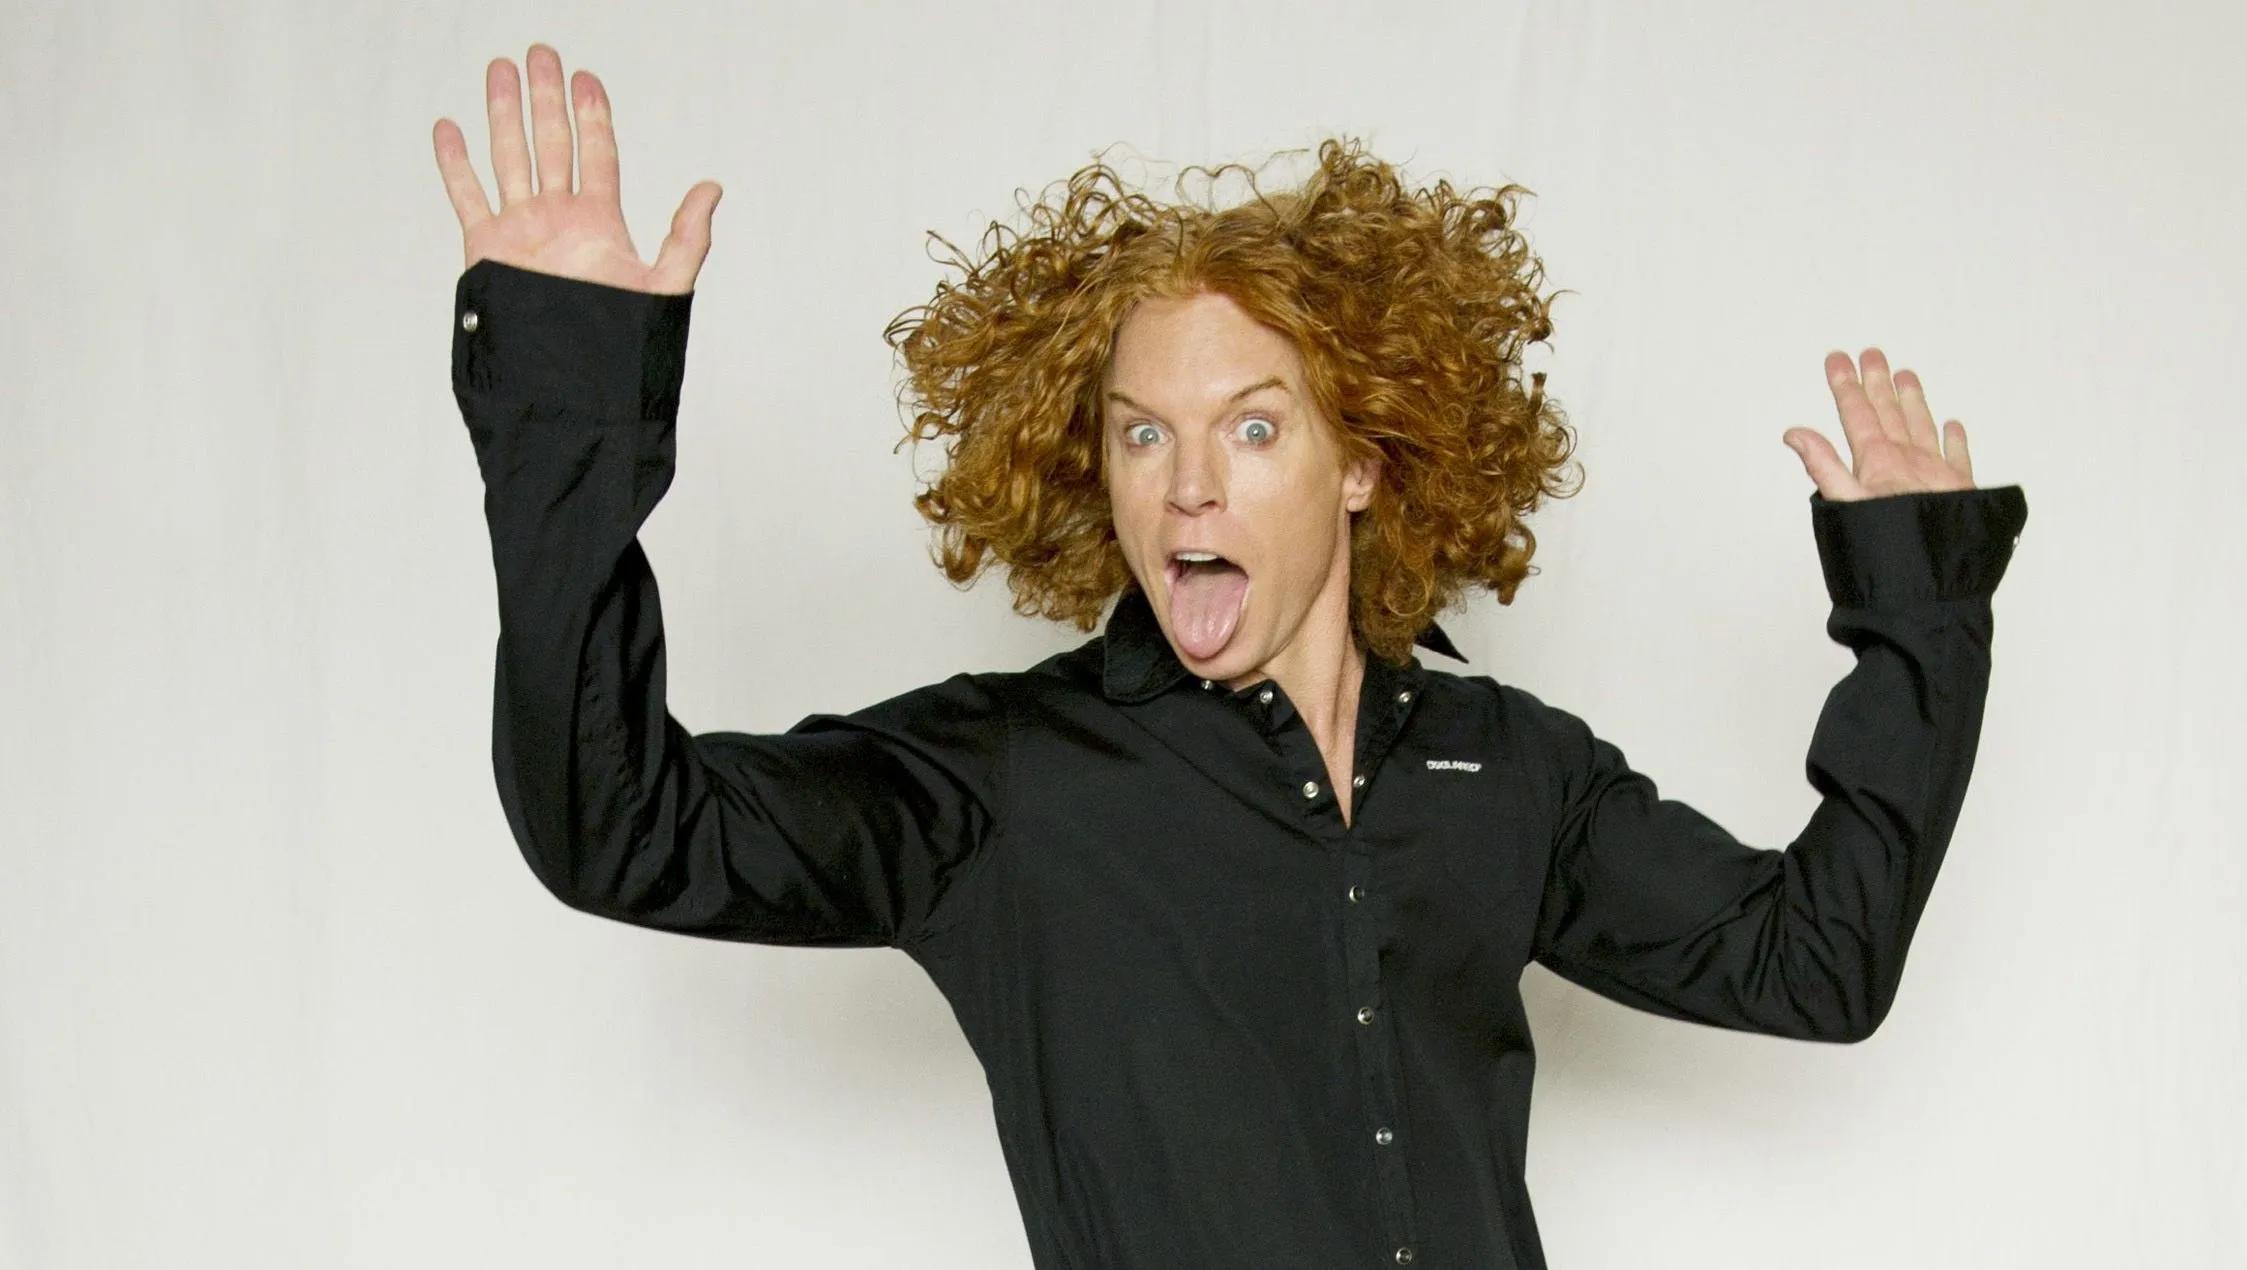 Carrot Top Before and After Speculated Plastic Surgery